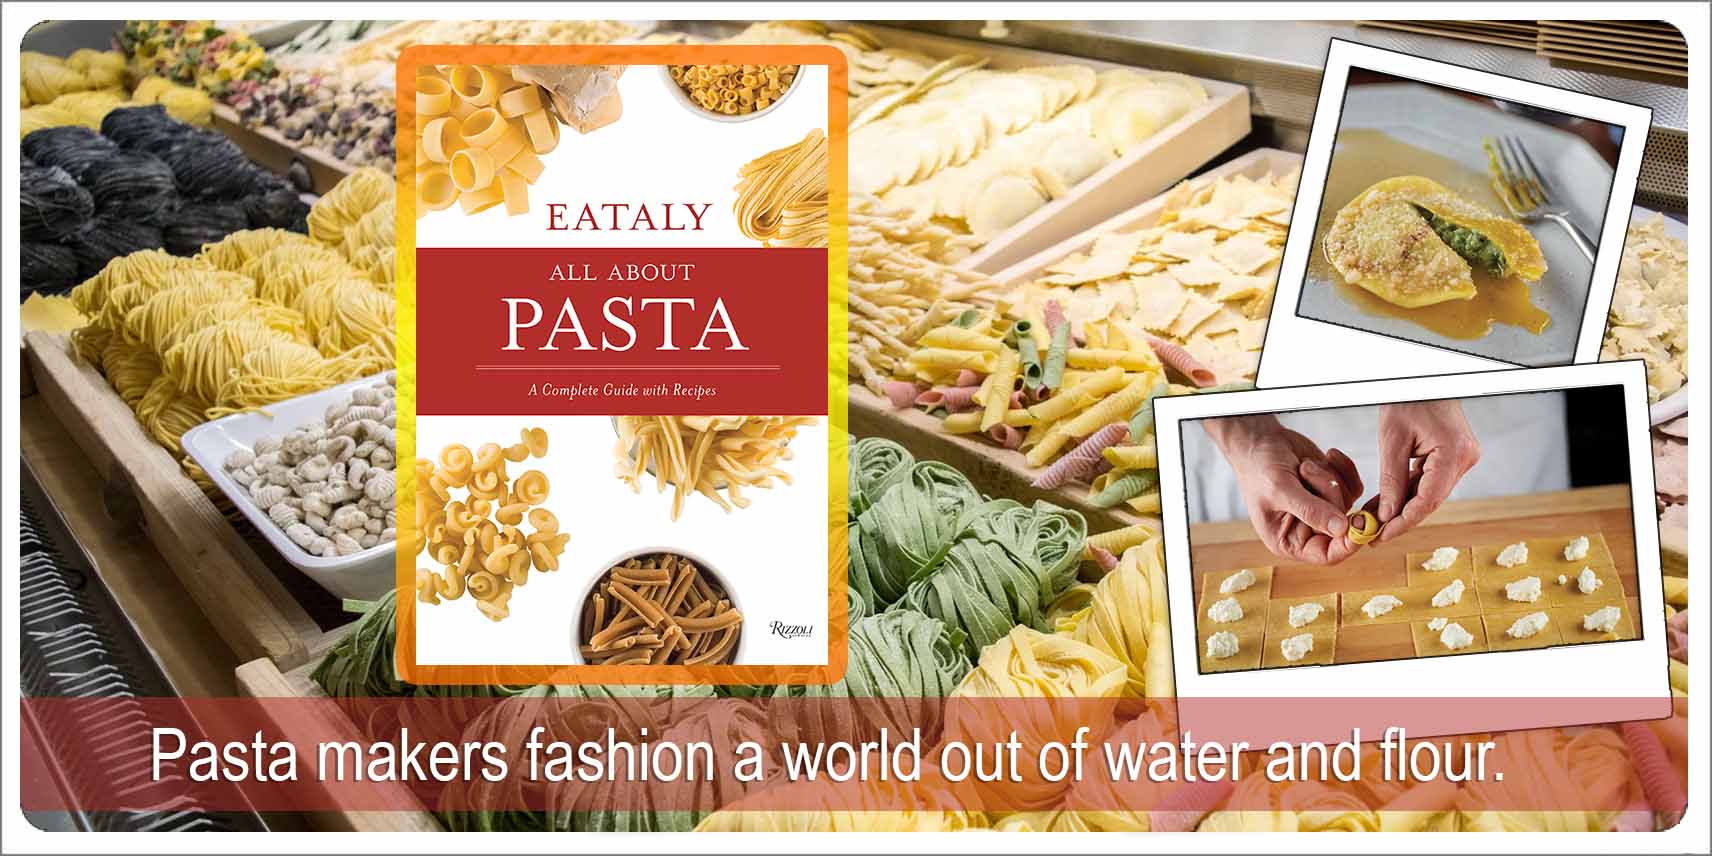 All About Pasta